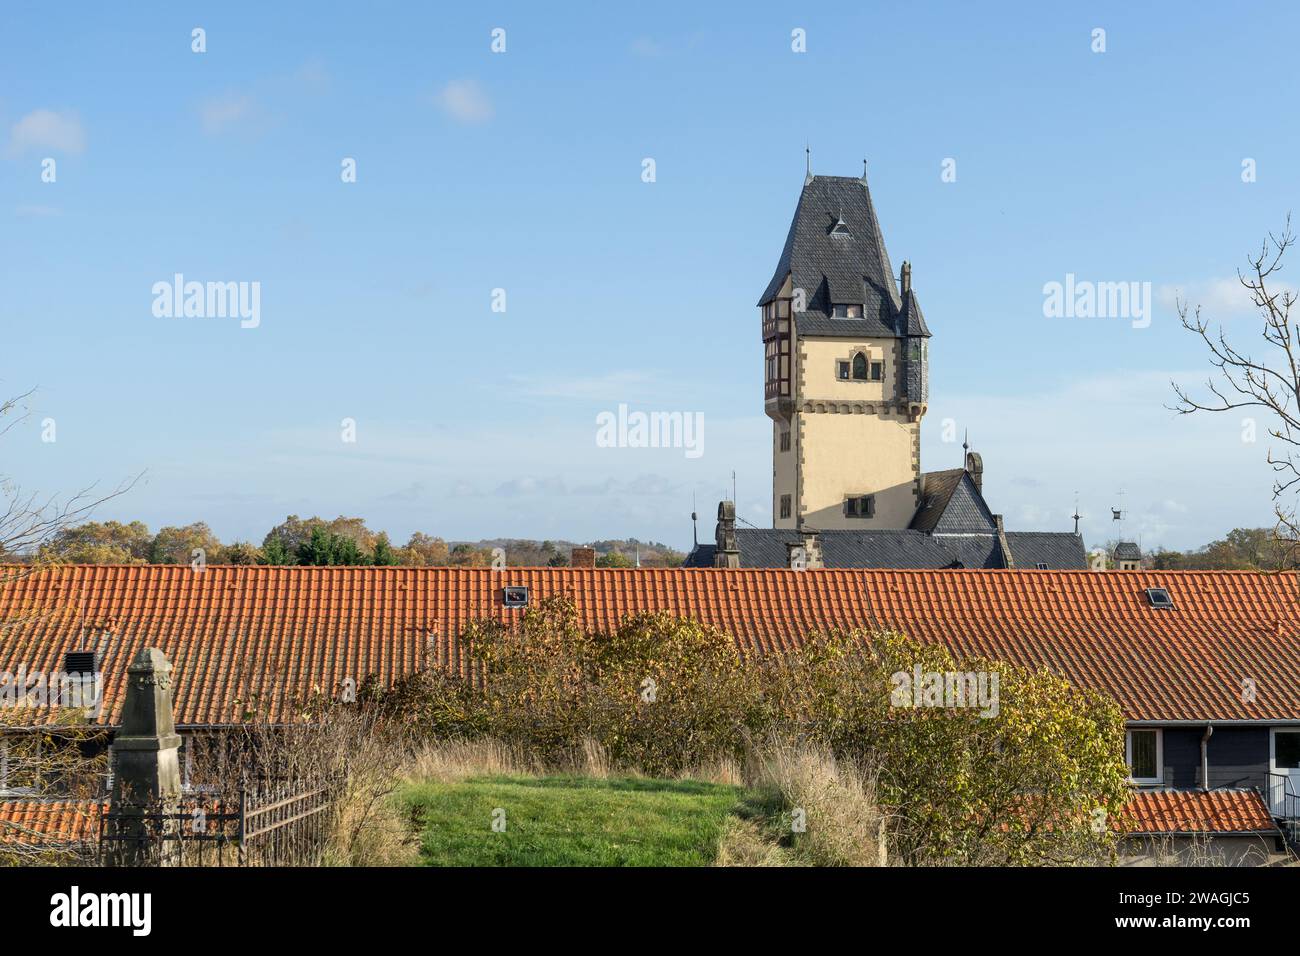 View of the tower of the Wilhelminian style villa Wipertistraße in Quedlinburg in autumn Stock Photo